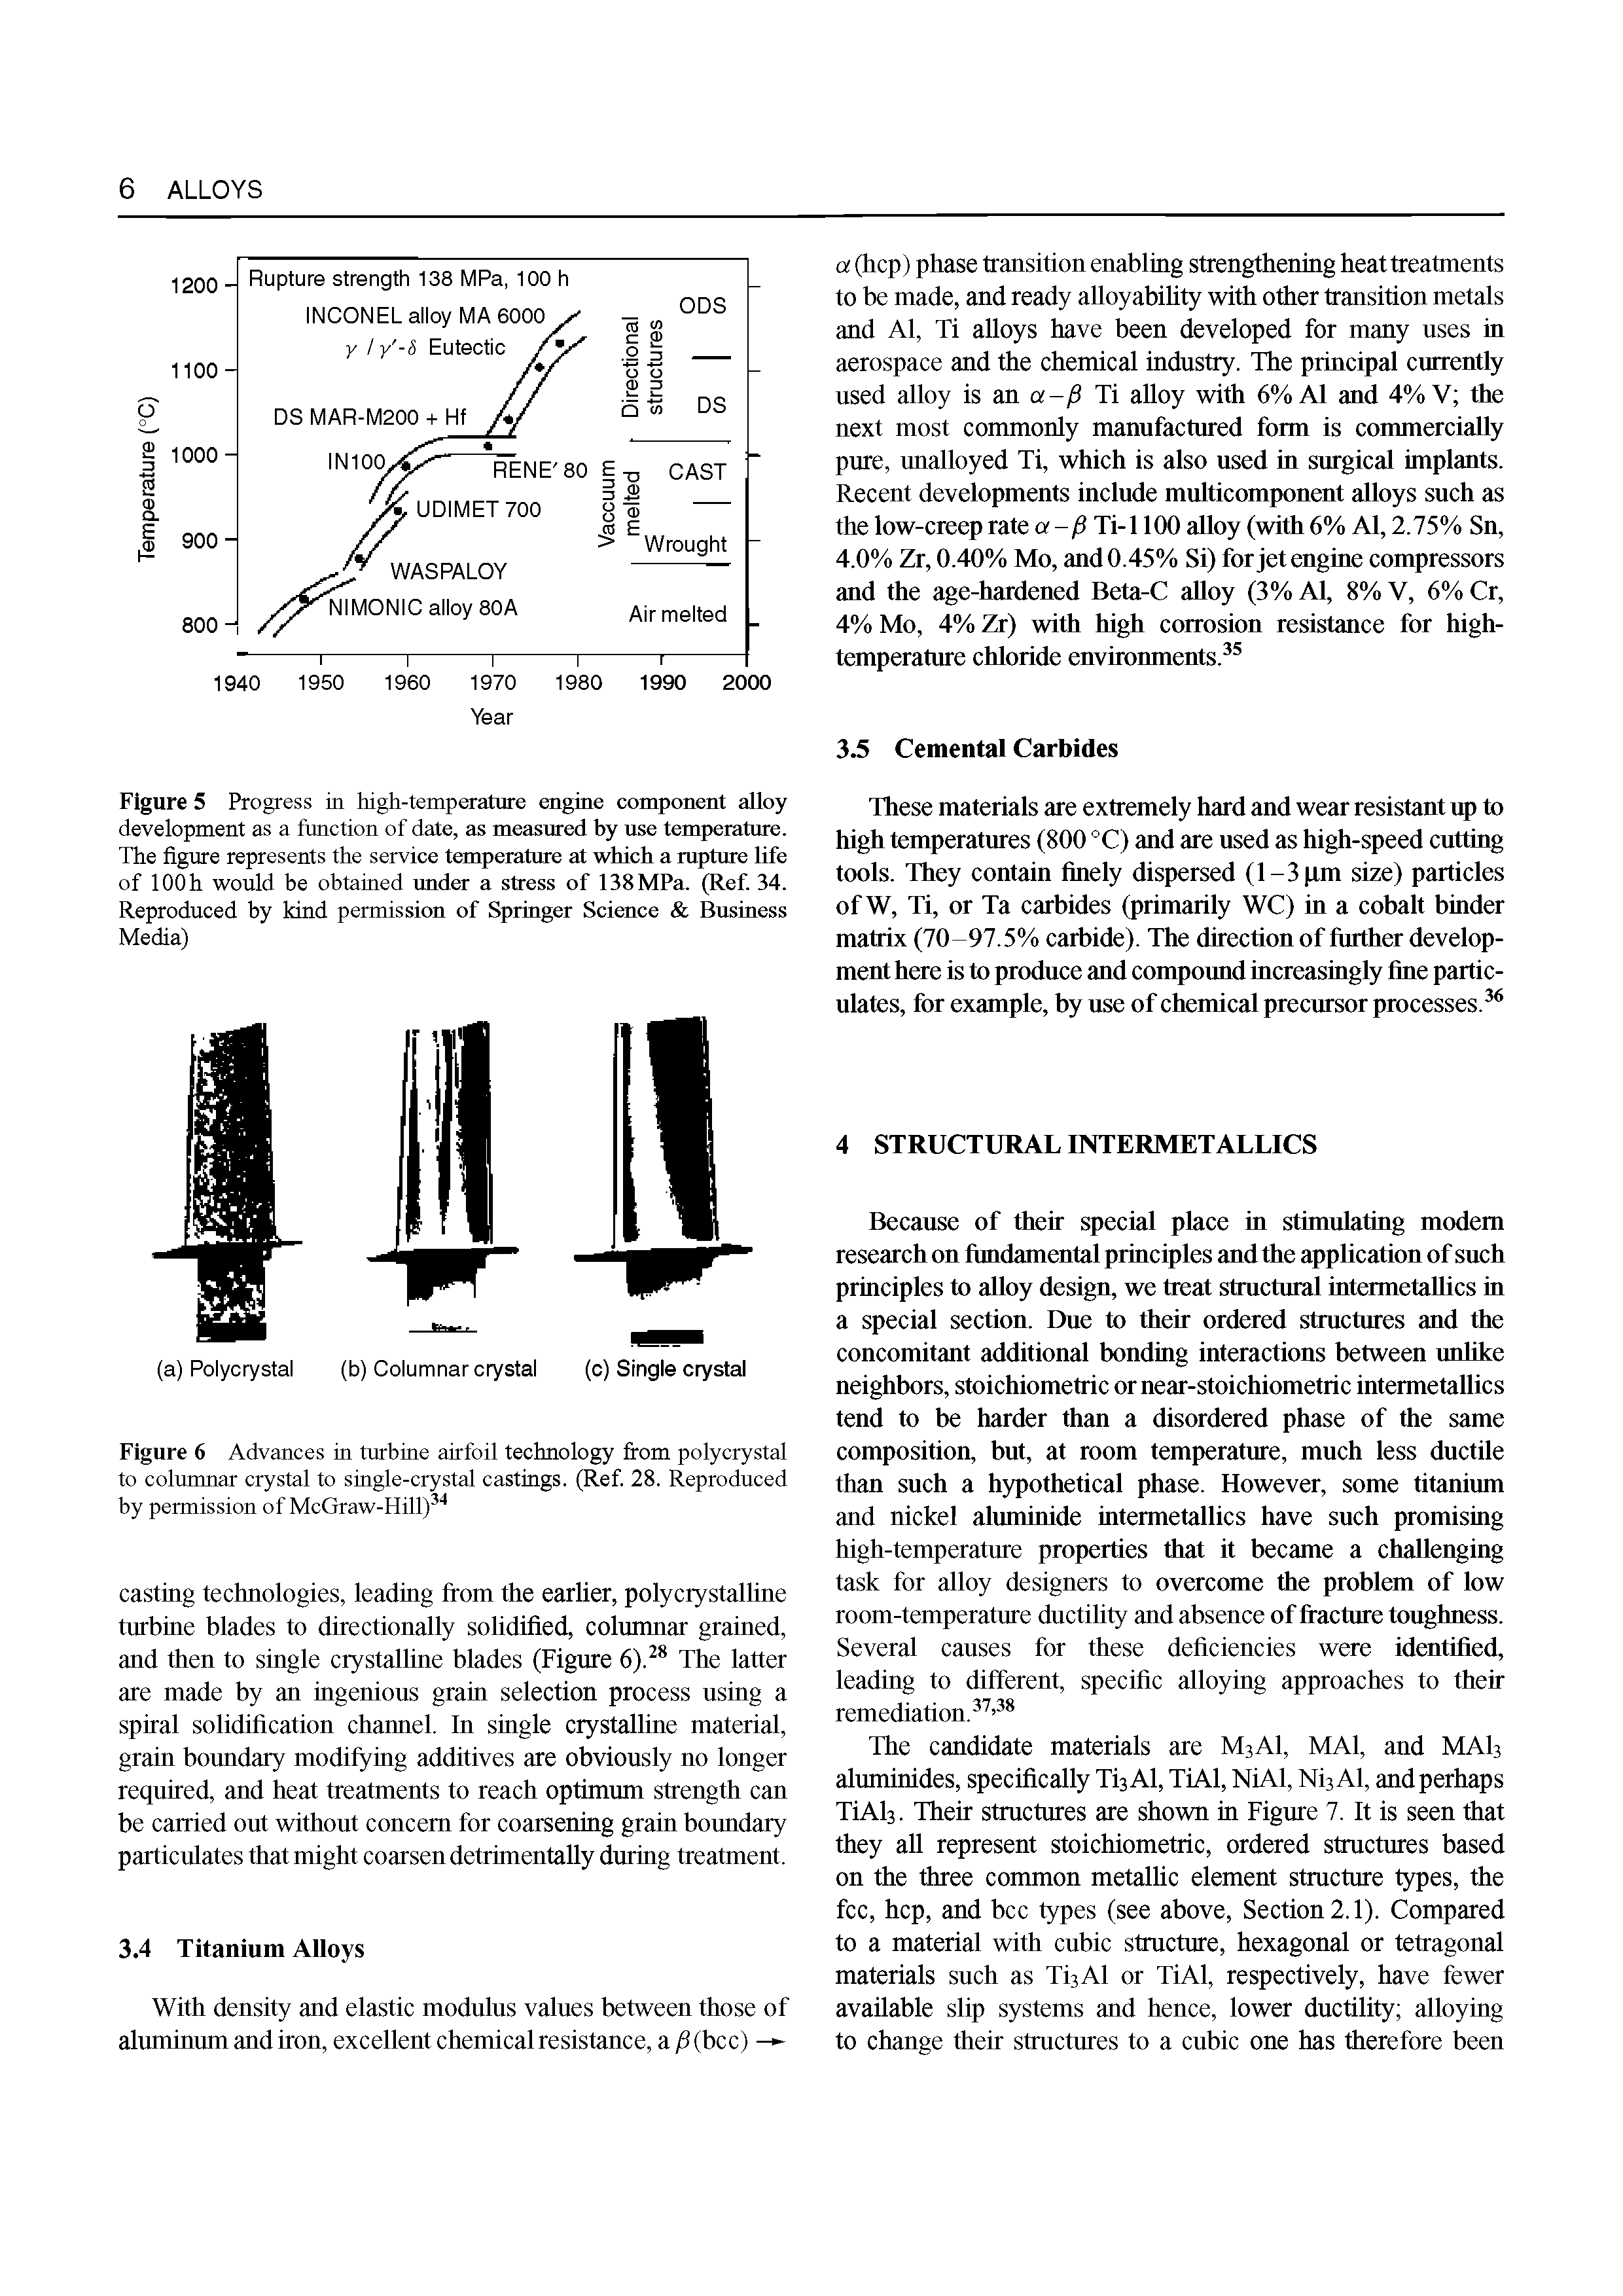 Figure 6 Advances in turbine airfoil technology from polycrystal to columnar crystal to single-crystal castings. (Ref. 28. Reproduced by permission of McGraw-Hill) ...